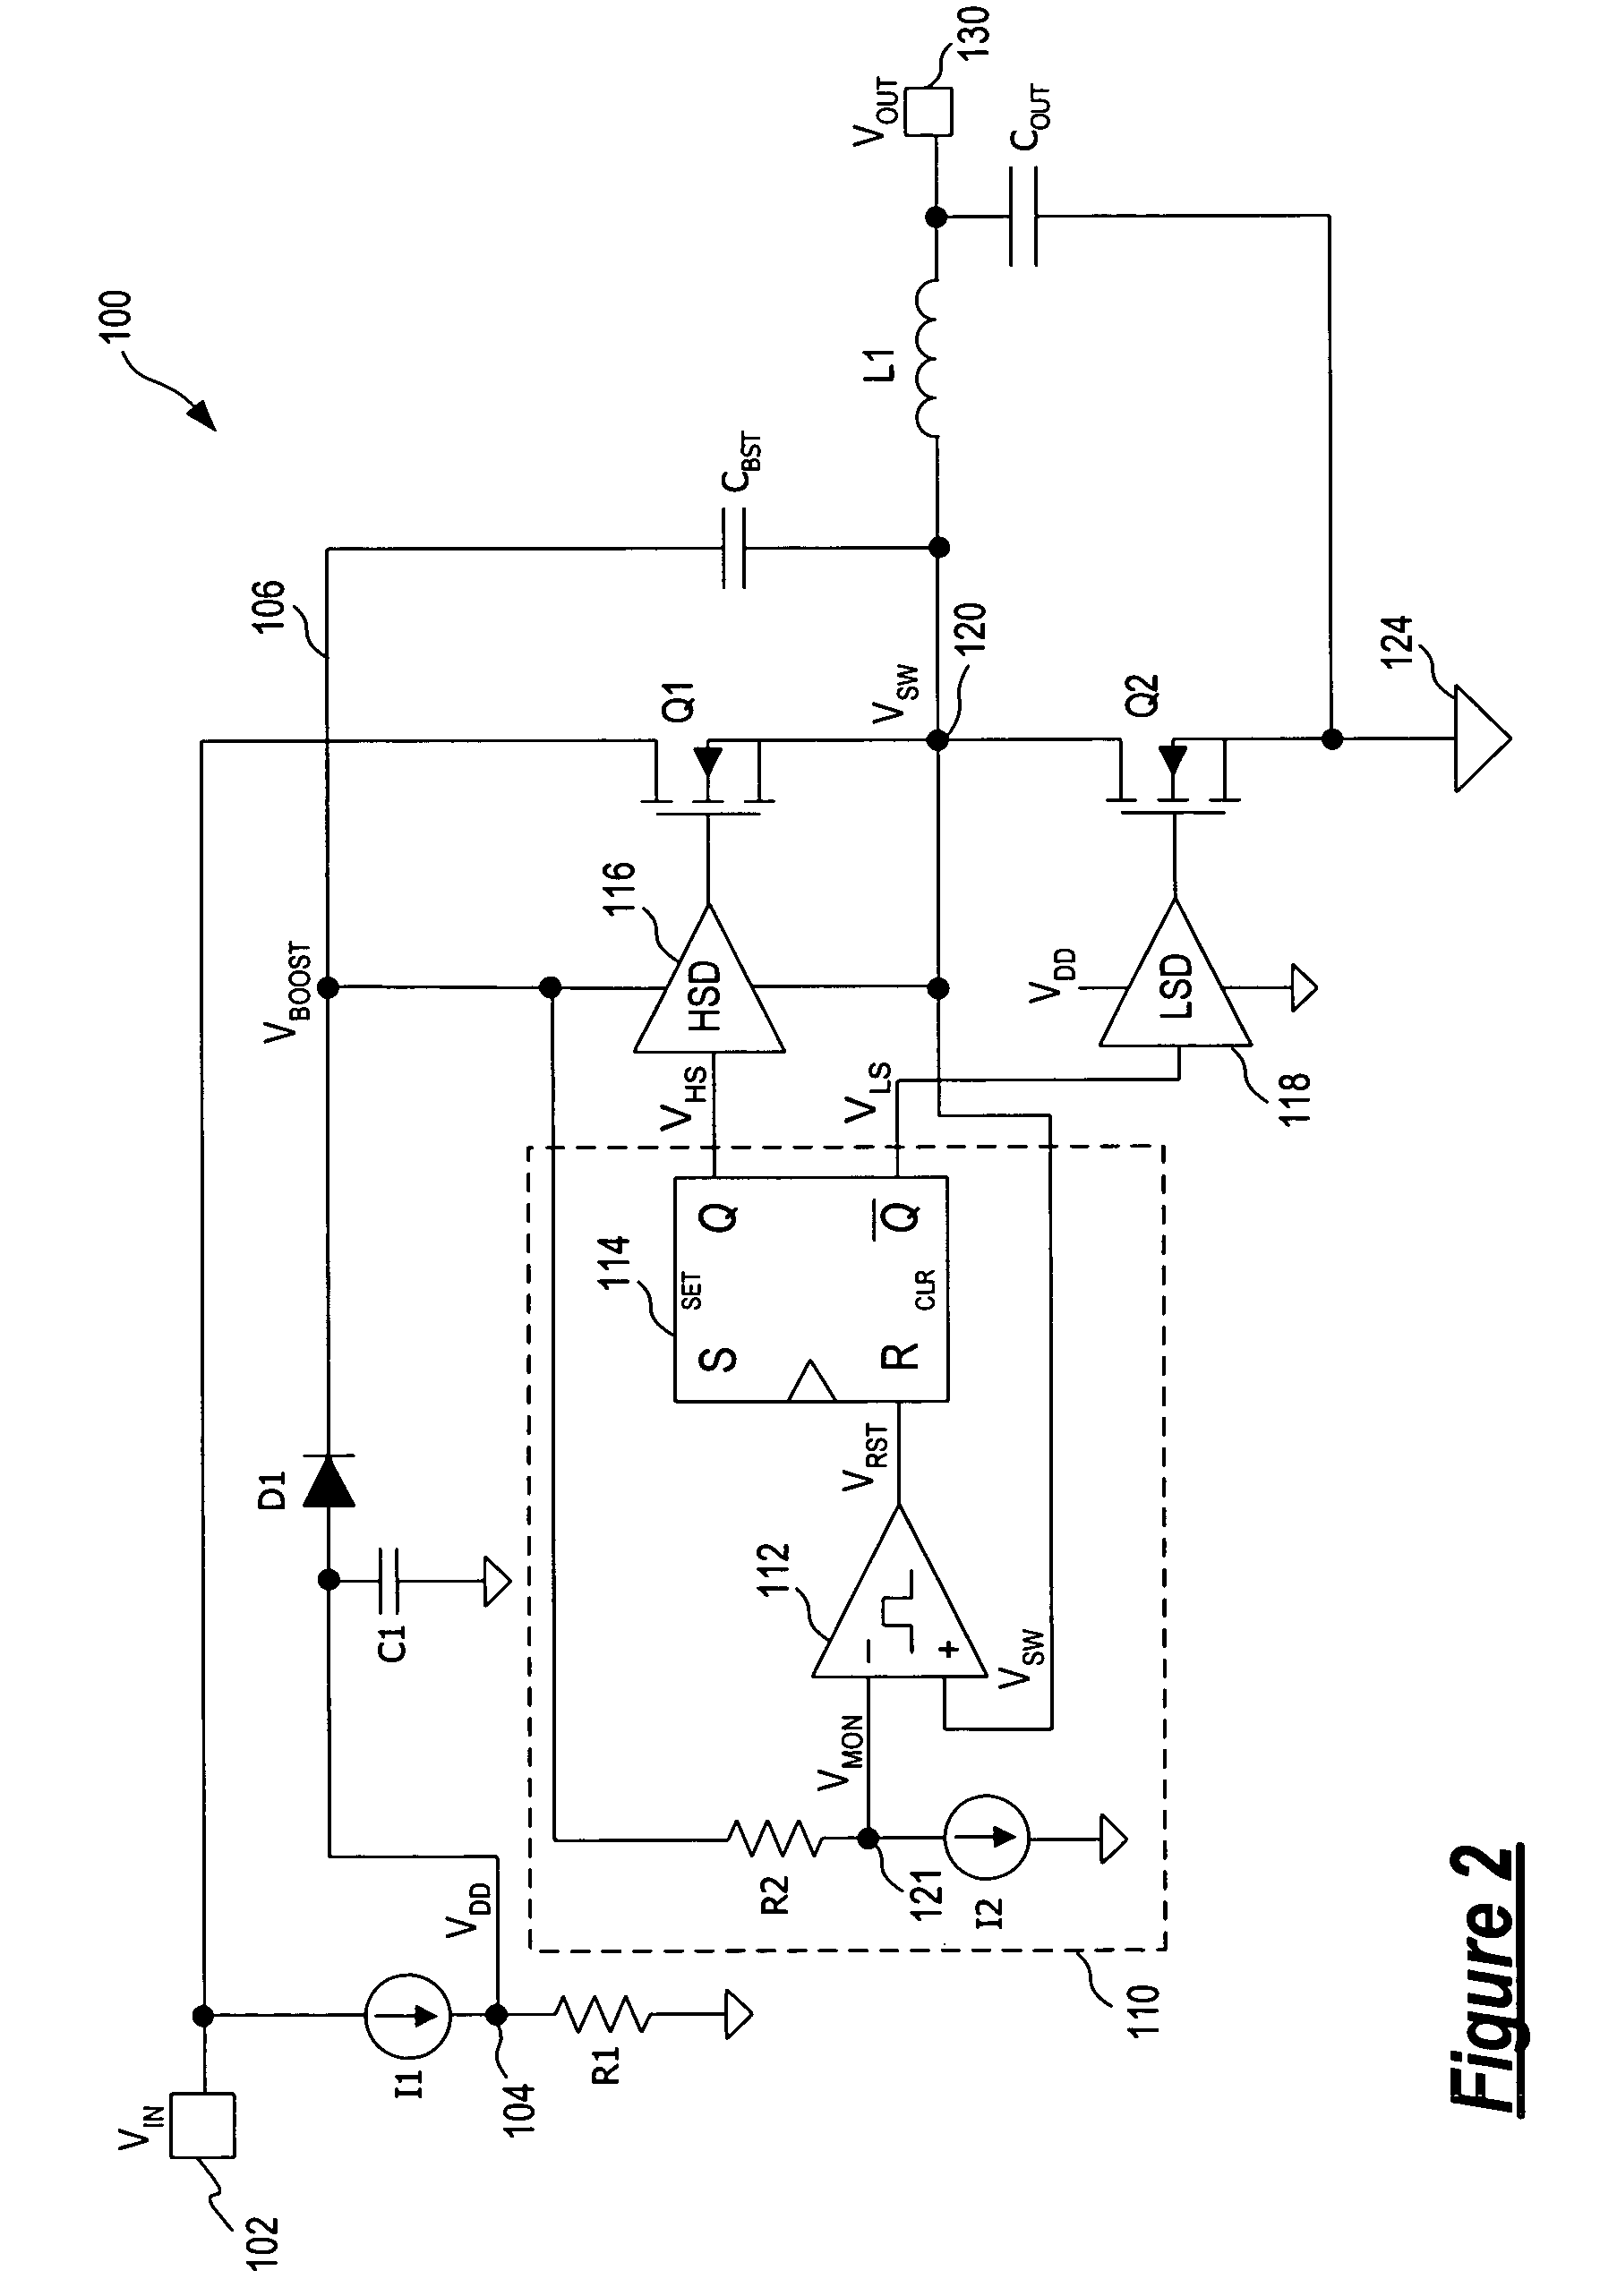 Control circuit for monitoring and maintaining a bootstrap voltage in an N-channel buck regulator